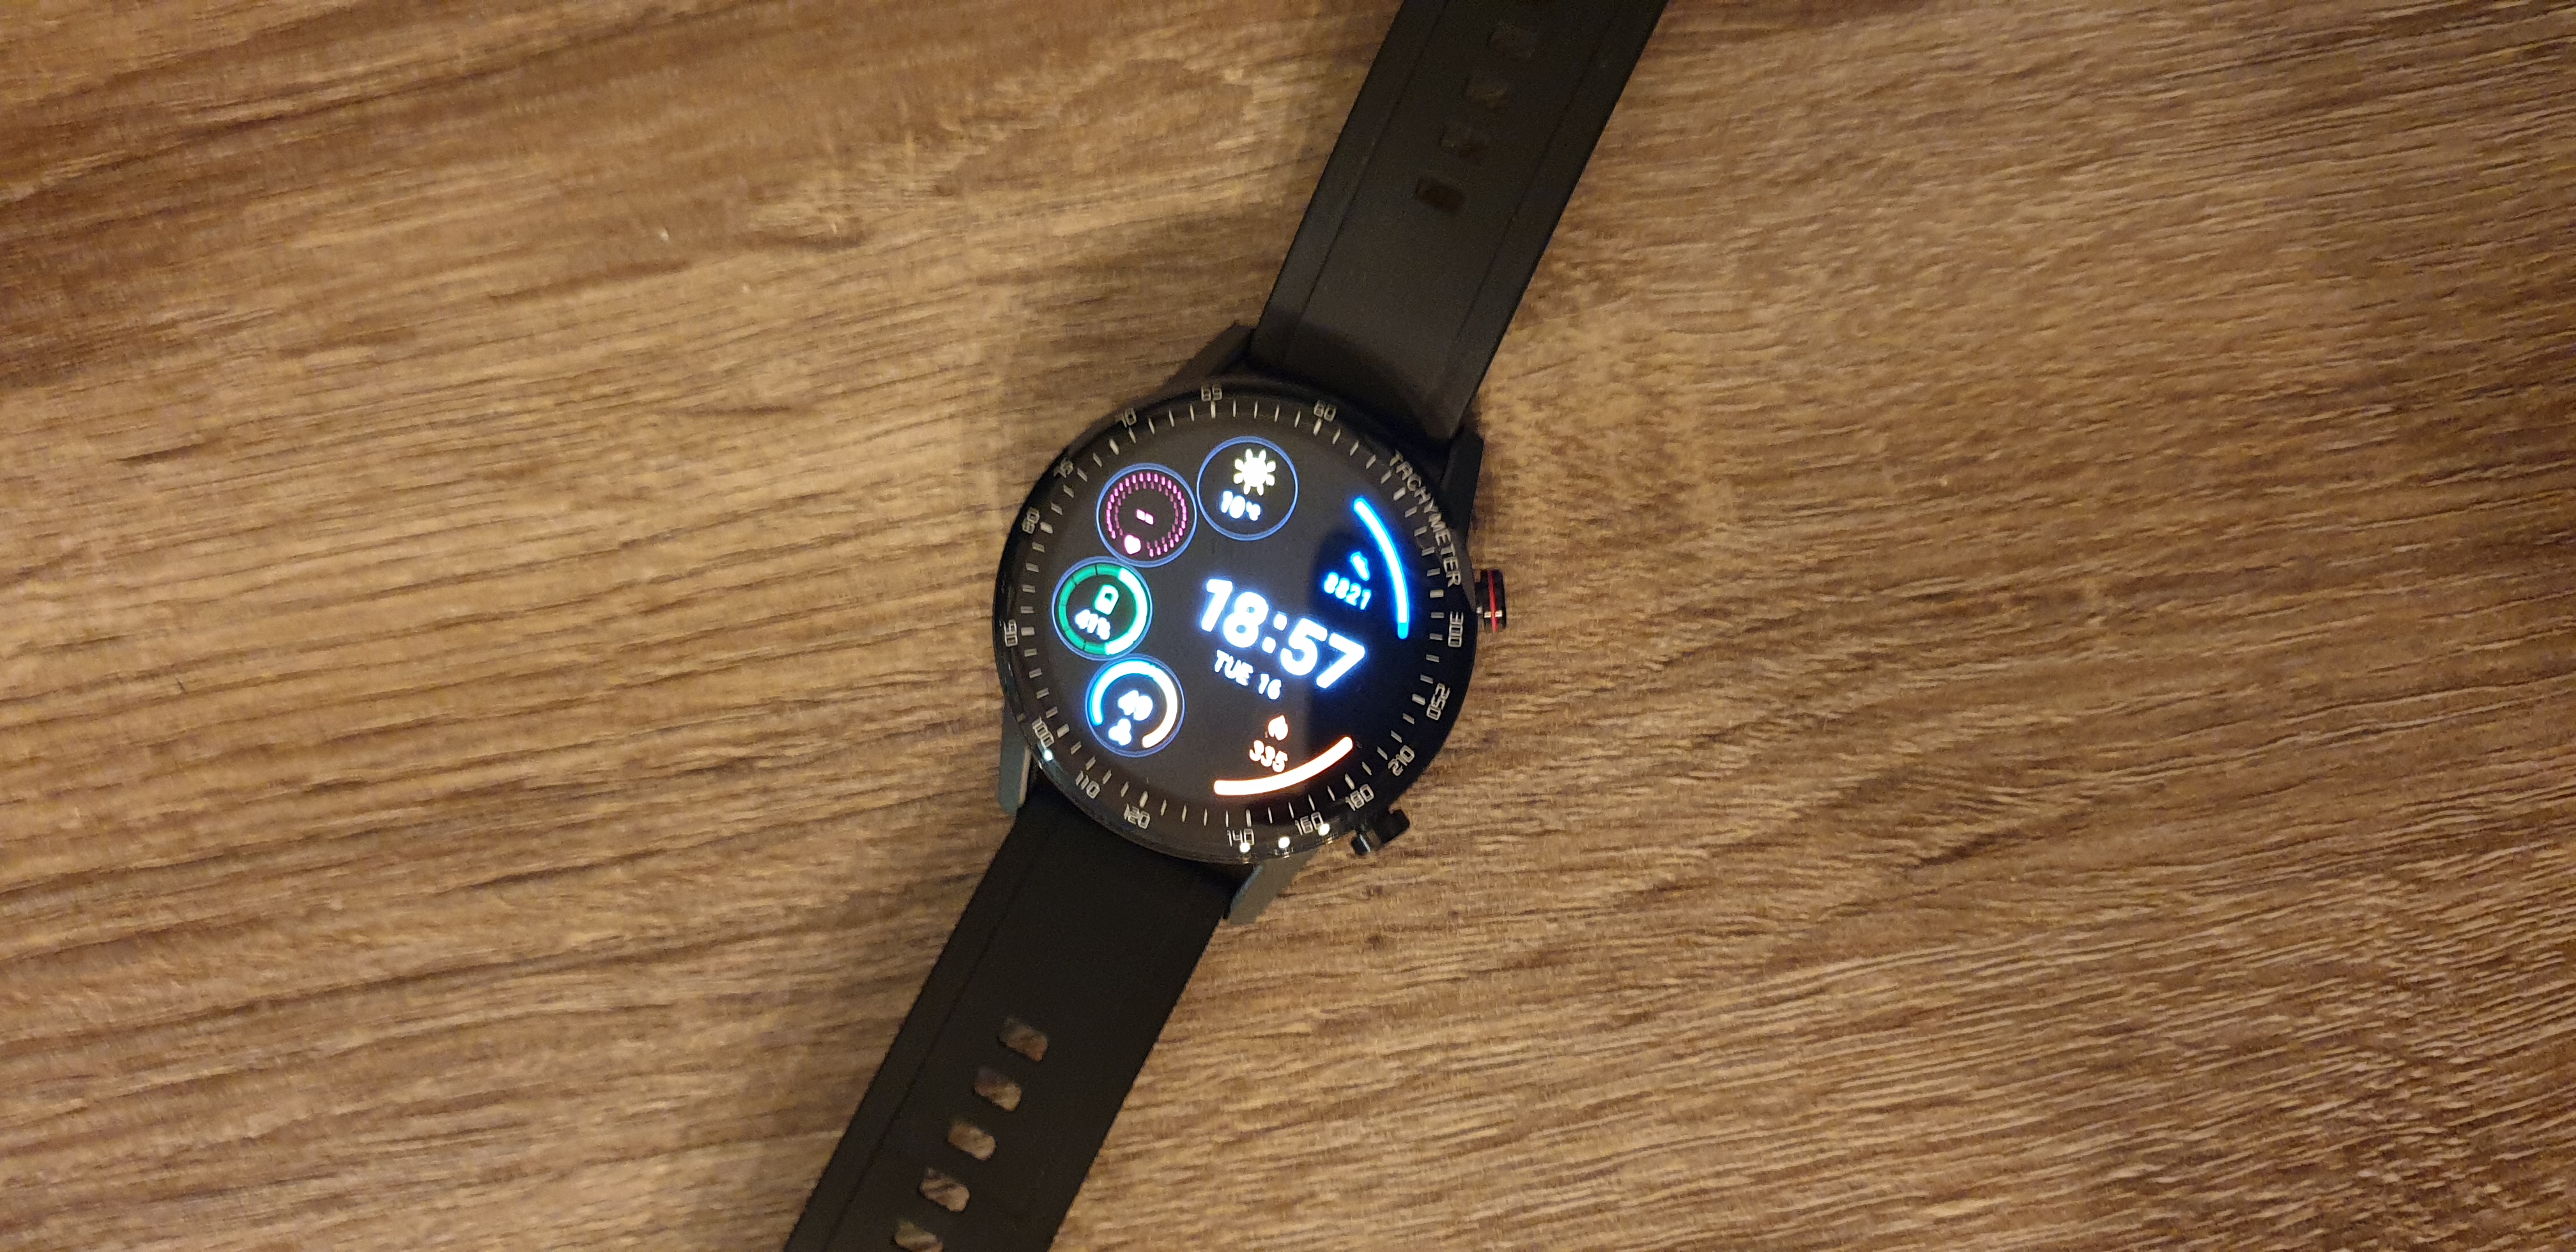 The Honor MagicWatch2, taken with a Galaxy S9